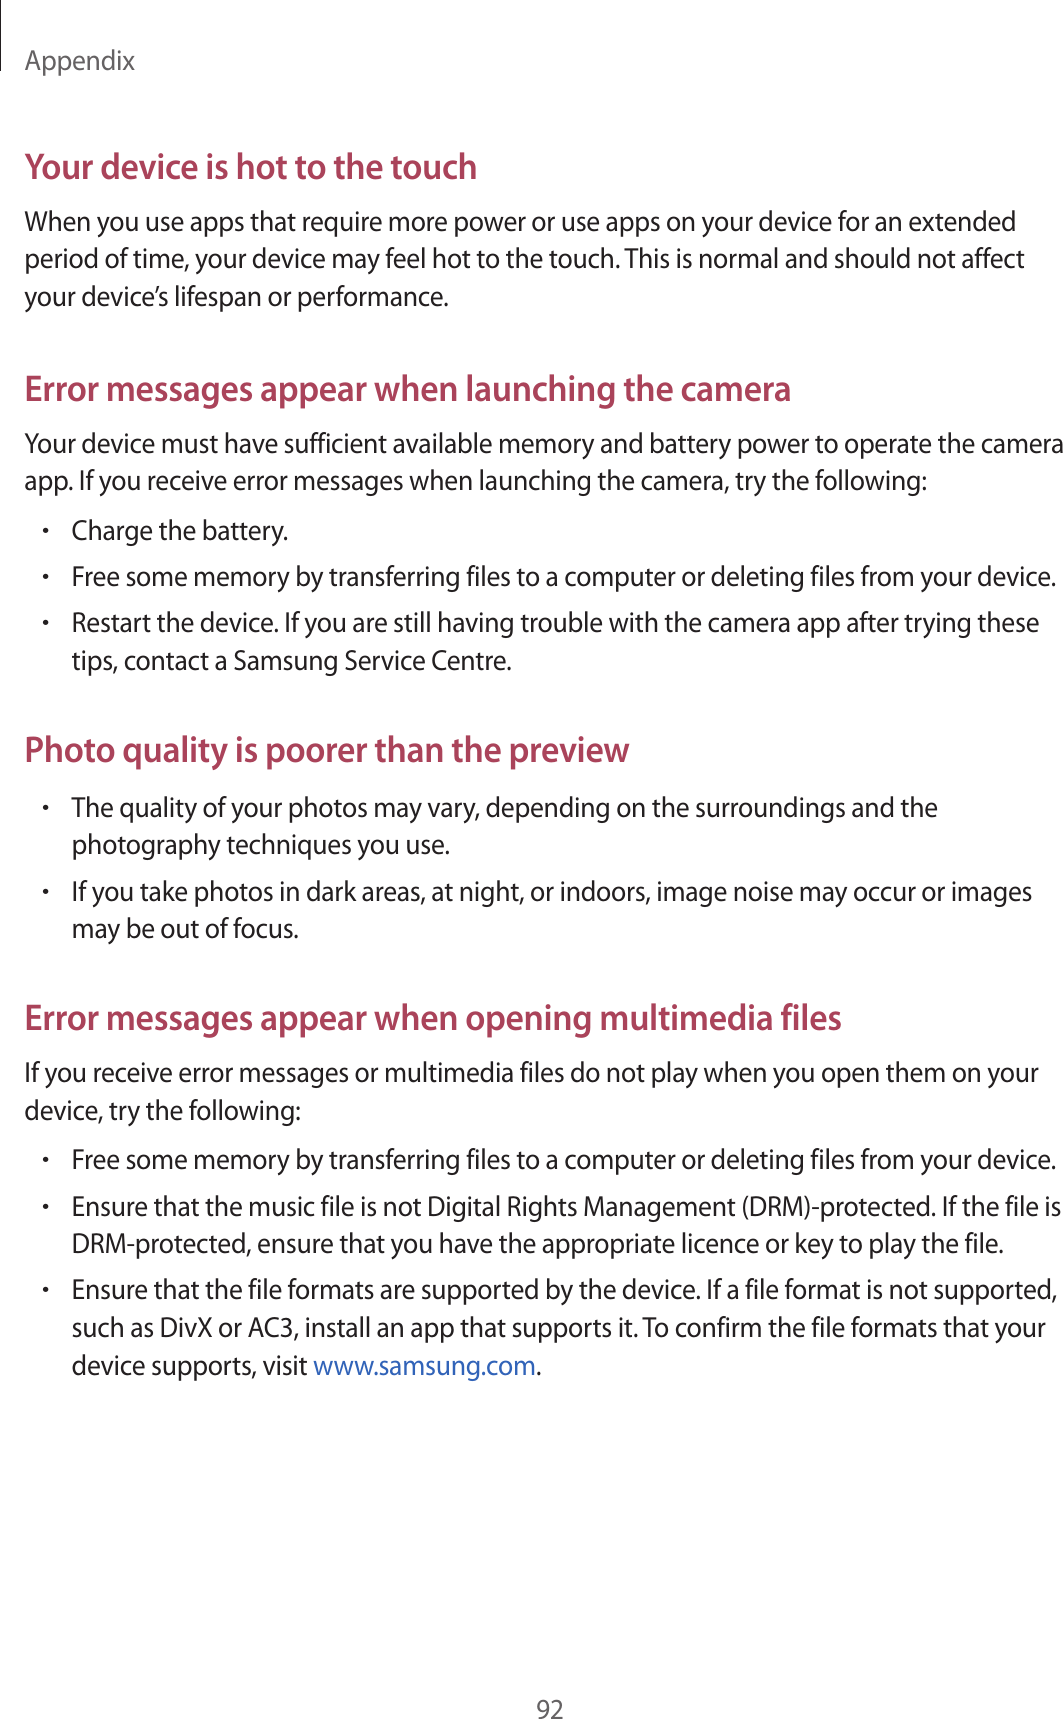 Appendix92Your device is hot to the touchWhen you use apps that require more power or use apps on your device for an extended period of time, your device may feel hot to the touch. This is normal and should not affect your device’s lifespan or performance.Error messages appear when launching the cameraYour device must have sufficient available memory and battery power to operate the camera app. If you receive error messages when launching the camera, try the following:•Charge the battery.•Free some memory by transferring files to a computer or deleting files from your device.•Restart the device. If you are still having trouble with the camera app after trying these tips, contact a Samsung Service Centre.Photo quality is poorer than the preview•The quality of your photos may vary, depending on the surroundings and the photography techniques you use.•If you take photos in dark areas, at night, or indoors, image noise may occur or images may be out of focus.Error messages appear when opening multimedia filesIf you receive error messages or multimedia files do not play when you open them on your device, try the following:•Free some memory by transferring files to a computer or deleting files from your device.•Ensure that the music file is not Digital Rights Management (DRM)-protected. If the file is DRM-protected, ensure that you have the appropriate licence or key to play the file.•Ensure that the file formats are supported by the device. If a file format is not supported, such as DivX or AC3, install an app that supports it. To confirm the file formats that your device supports, visit www.samsung.com.